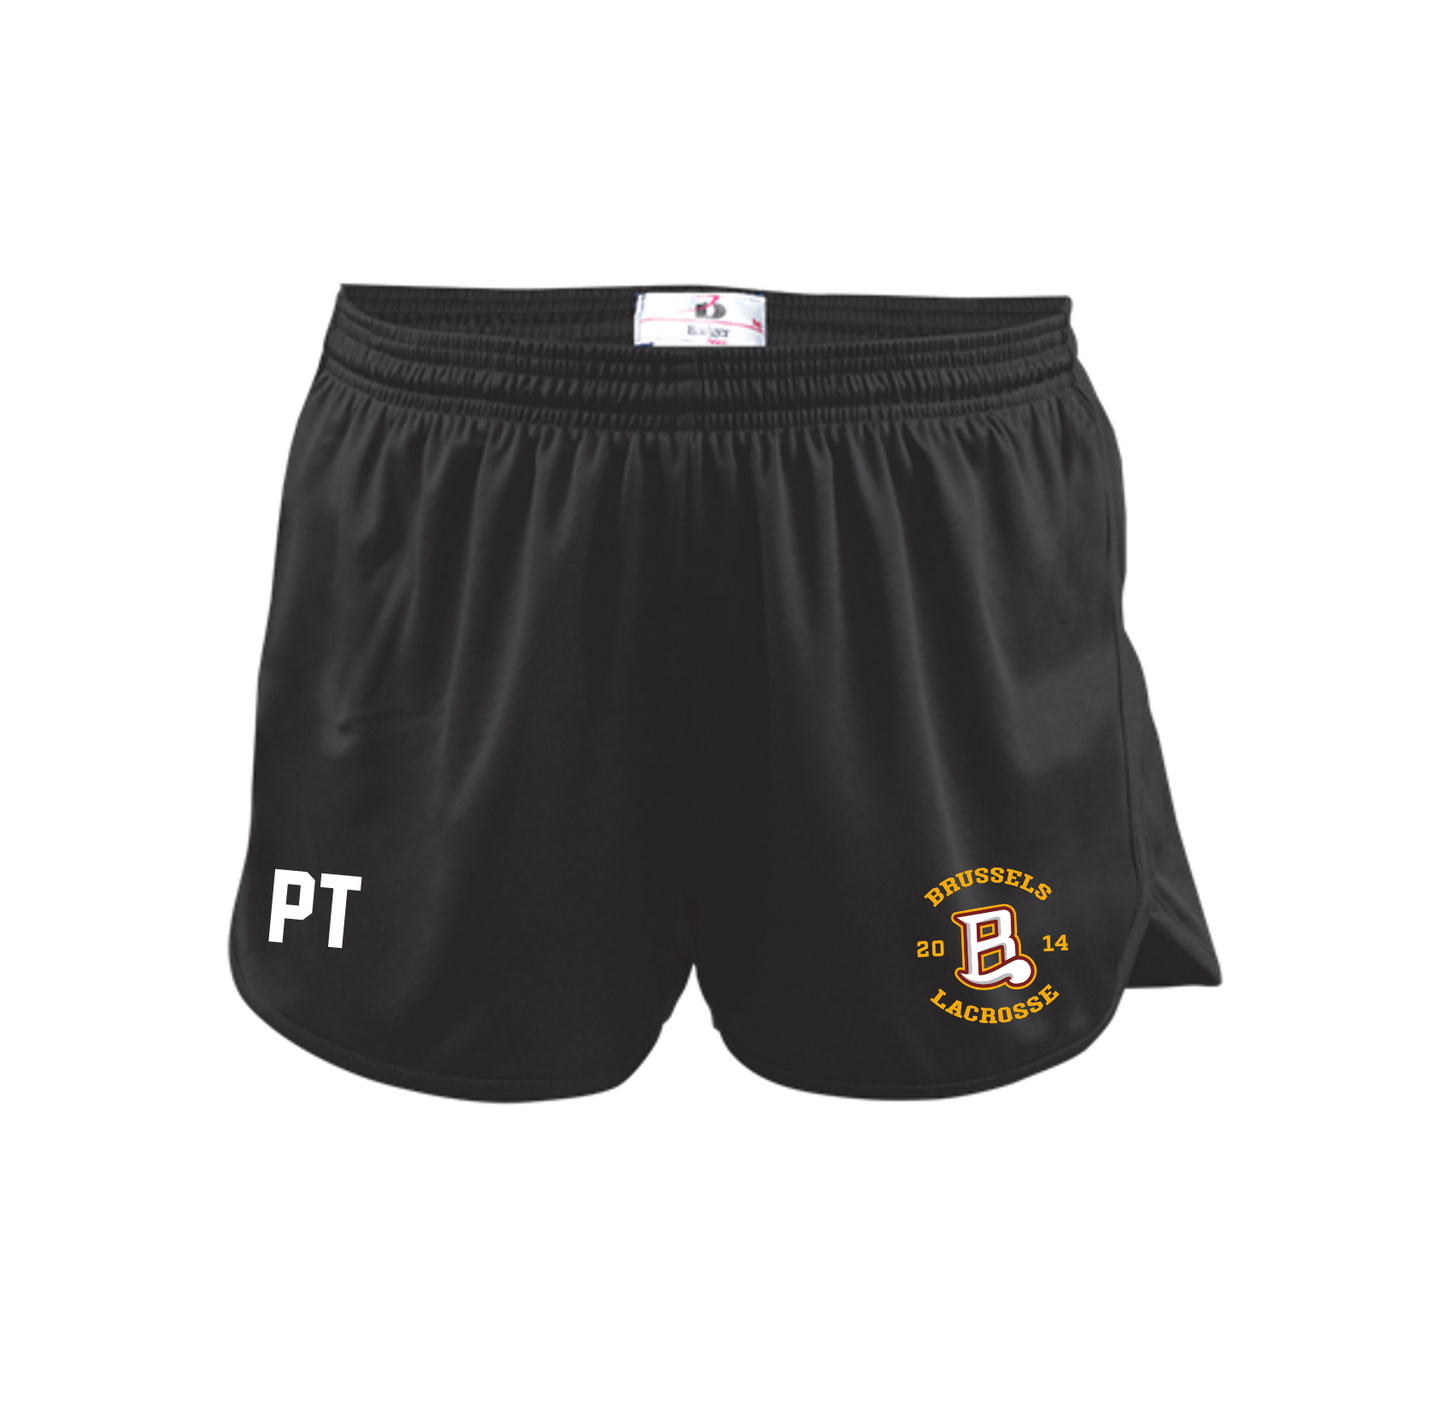 Brussels LC Women's Shorts